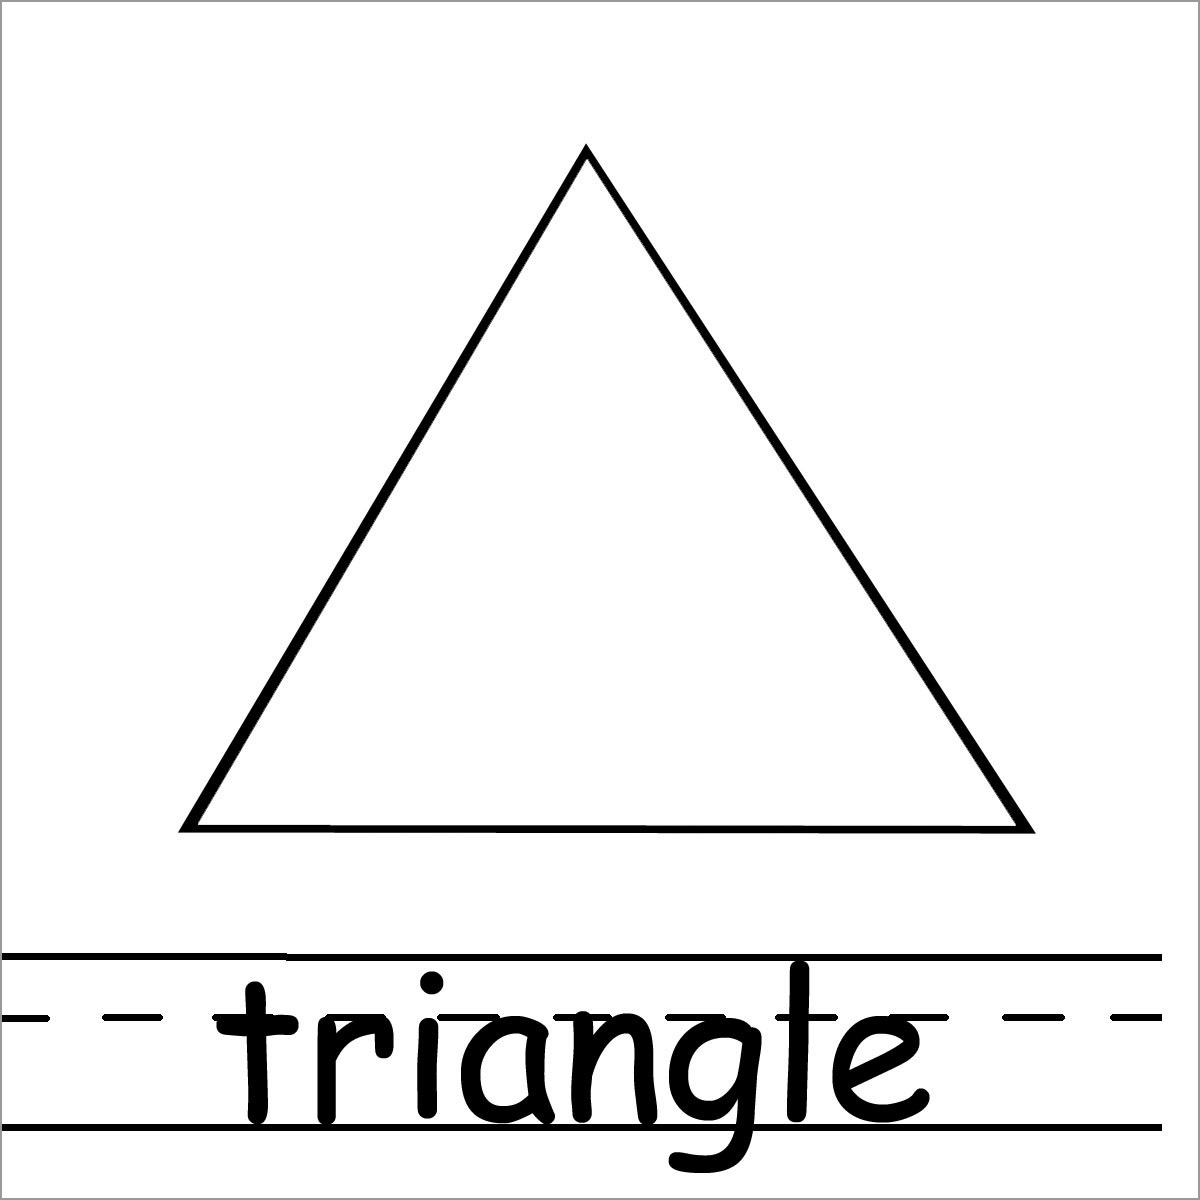 Triangle Coloring Page for toddlers